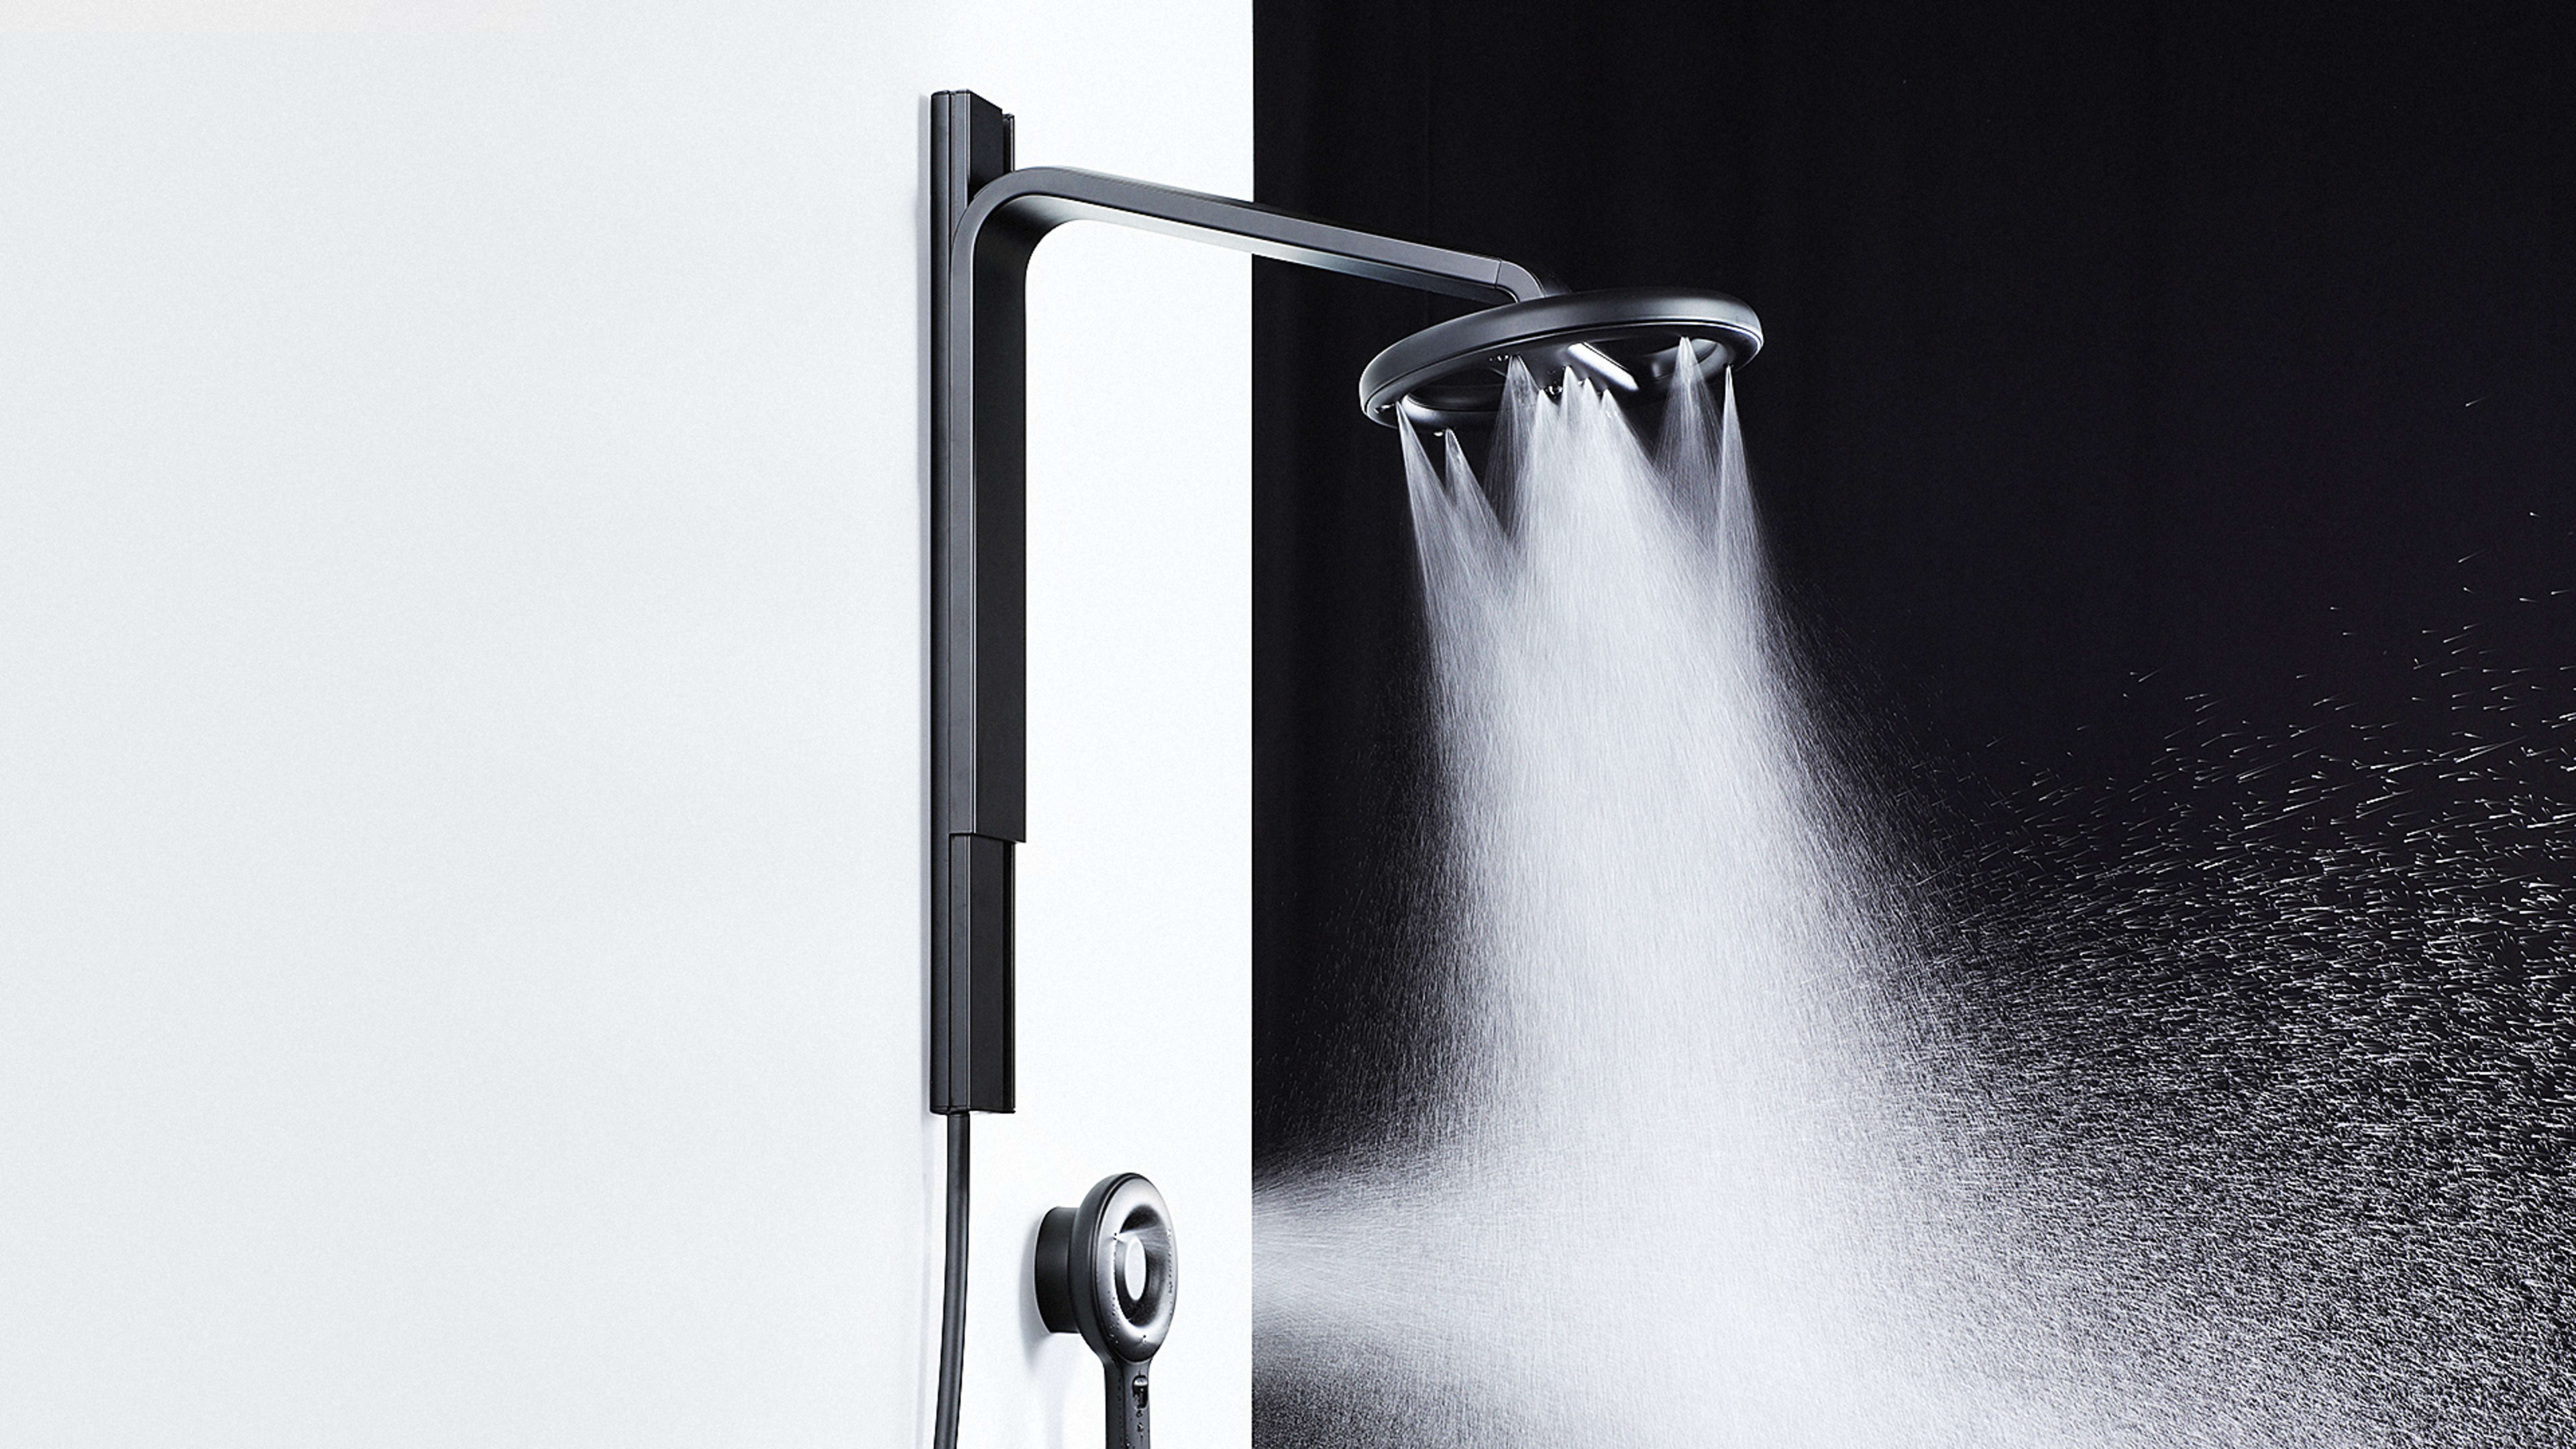 I tried the shower funded by Tim Cook and Eric Schmidt